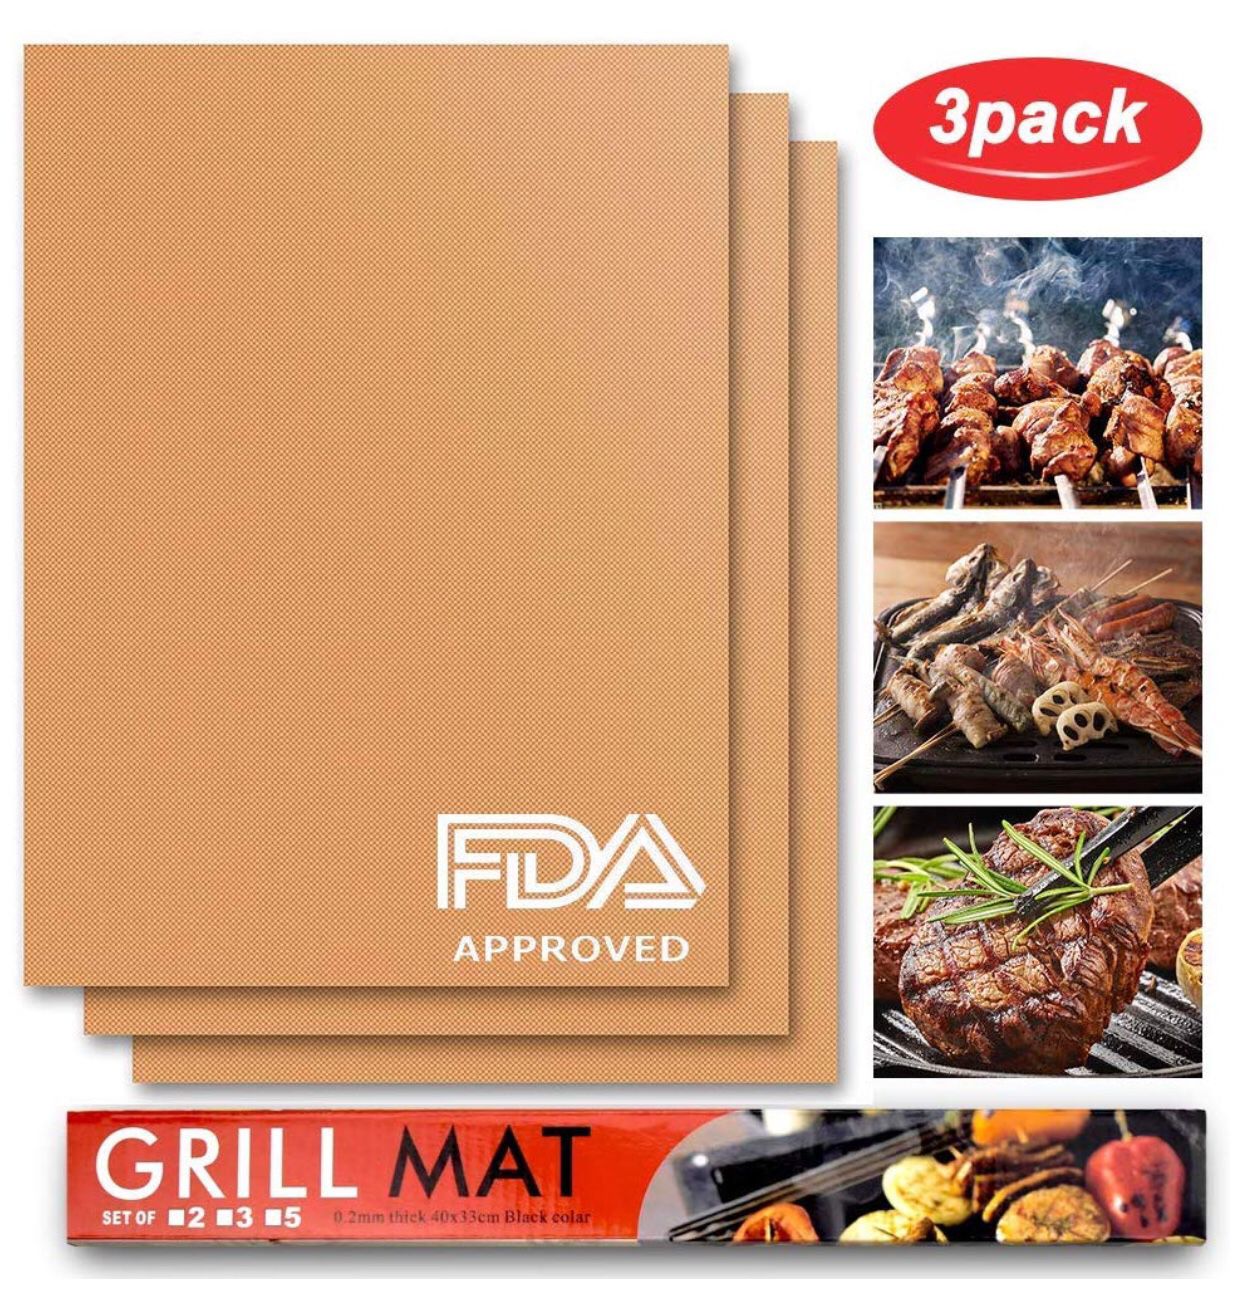 159. Non Stick BBQ Grill Mat - Set of 3 Barbecue Mat & Baking Mat-Reusable and Easy to Clean, for Gas, Charcoal, Electric Grill